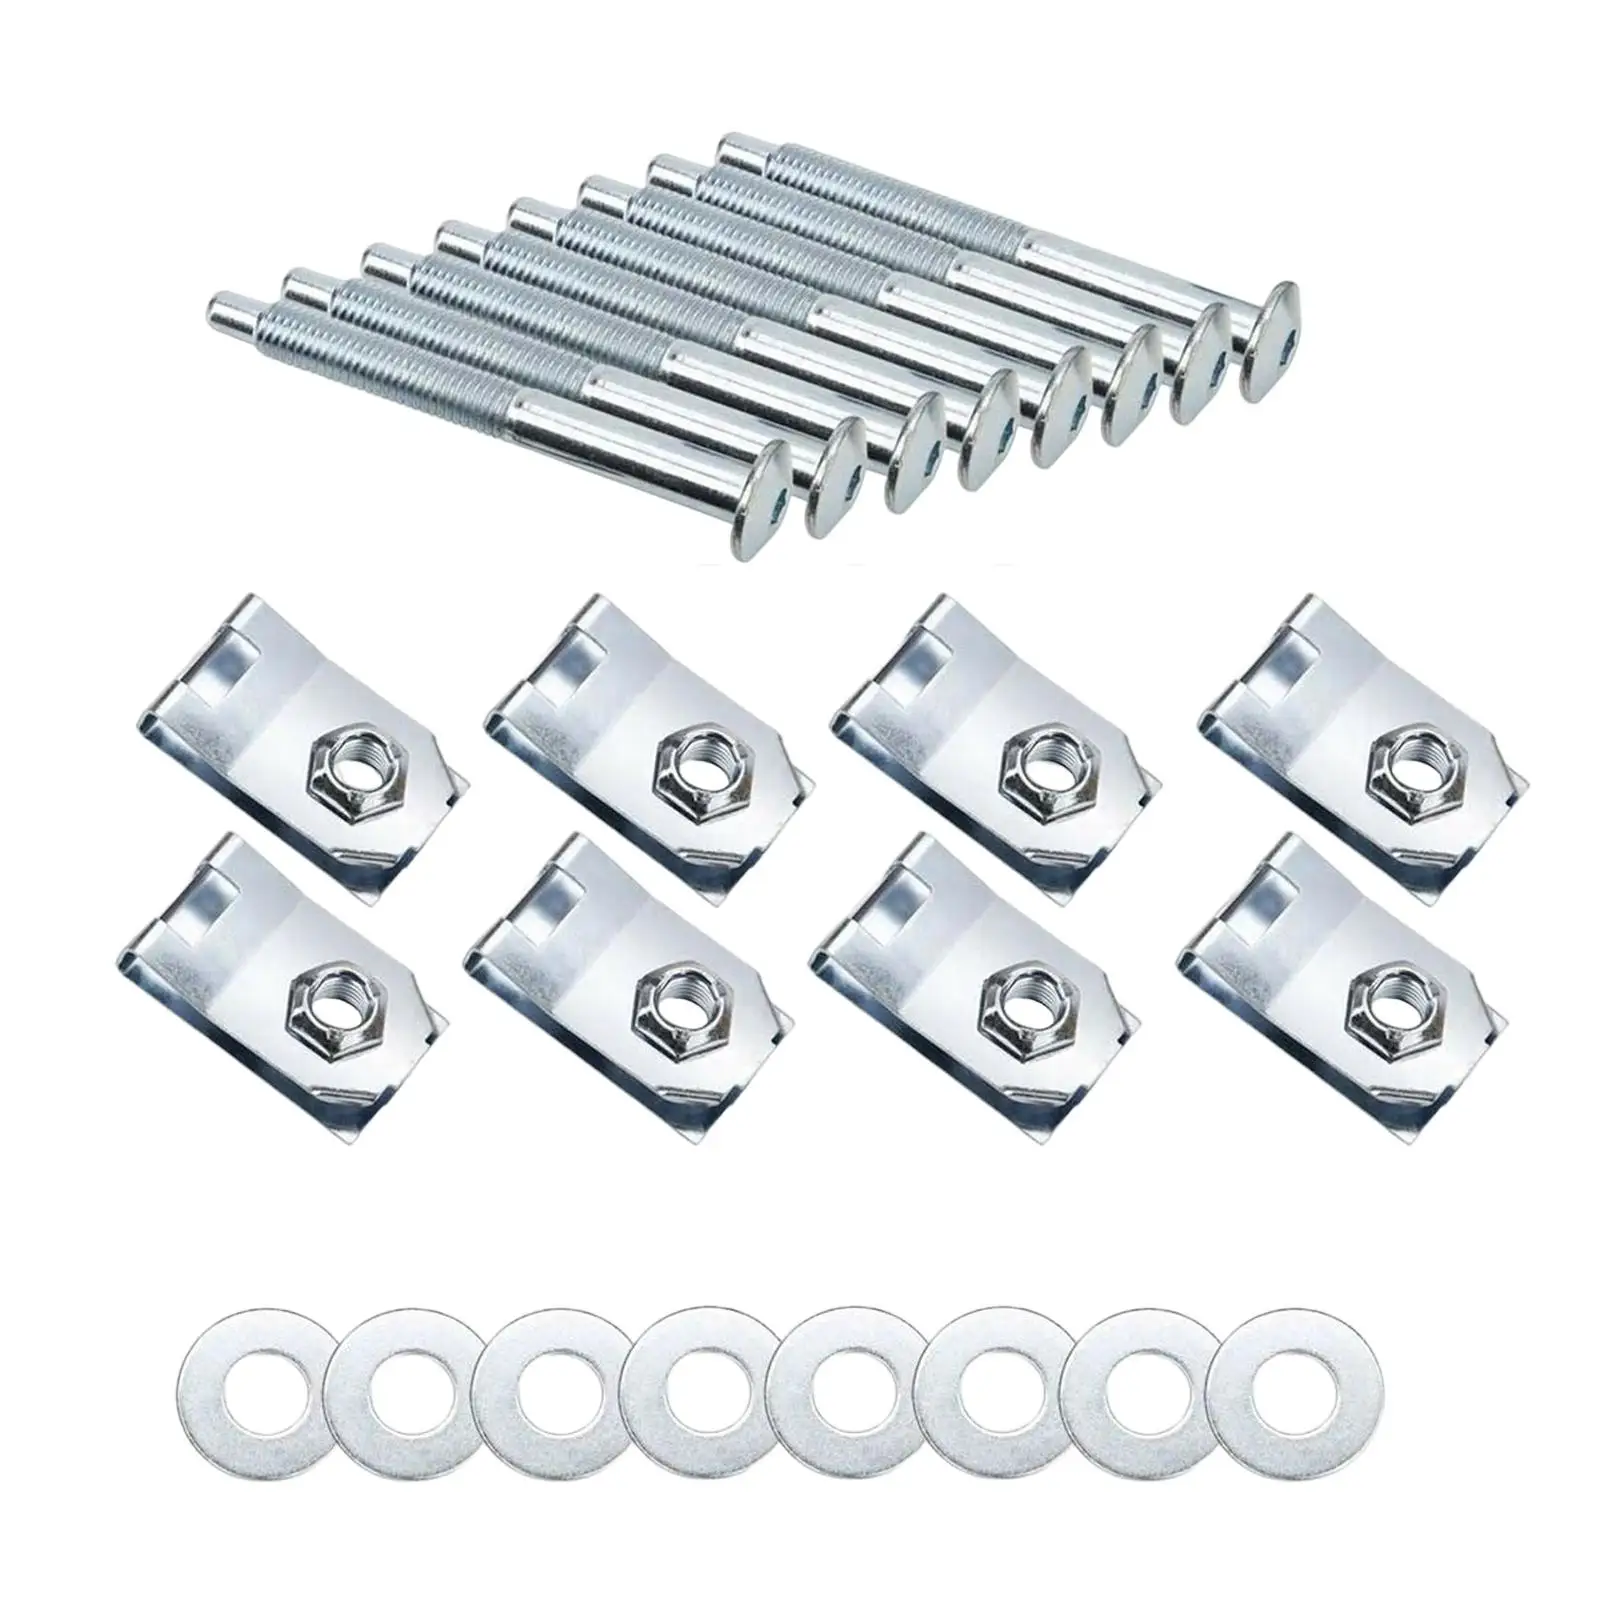 Truck Bed Mounting BOLTS Kit Hardware Fasteners for  F250